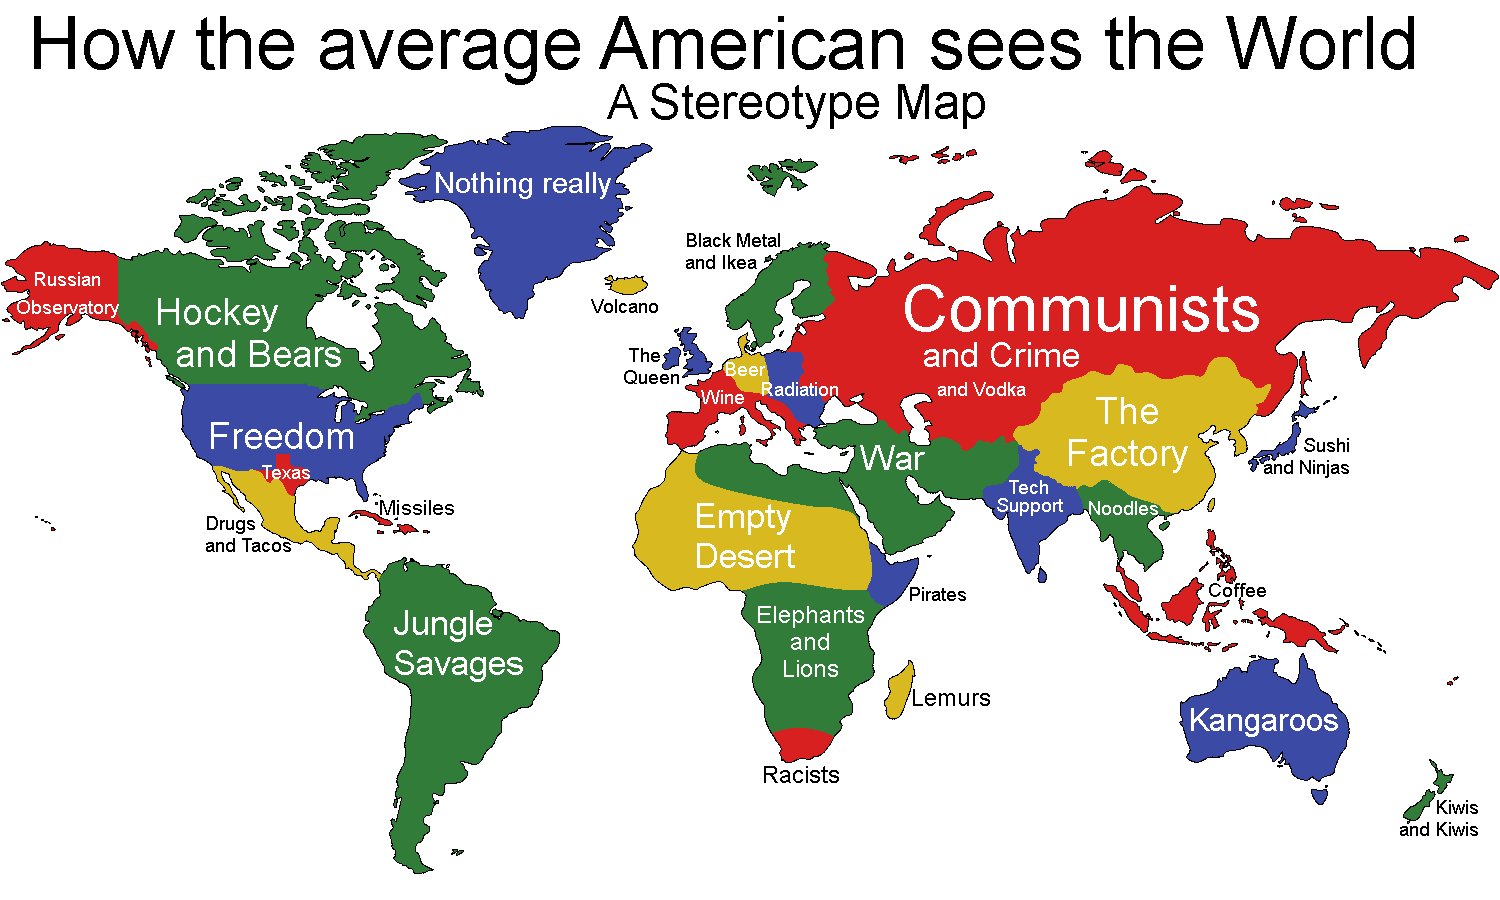 How the U.S. sees the world